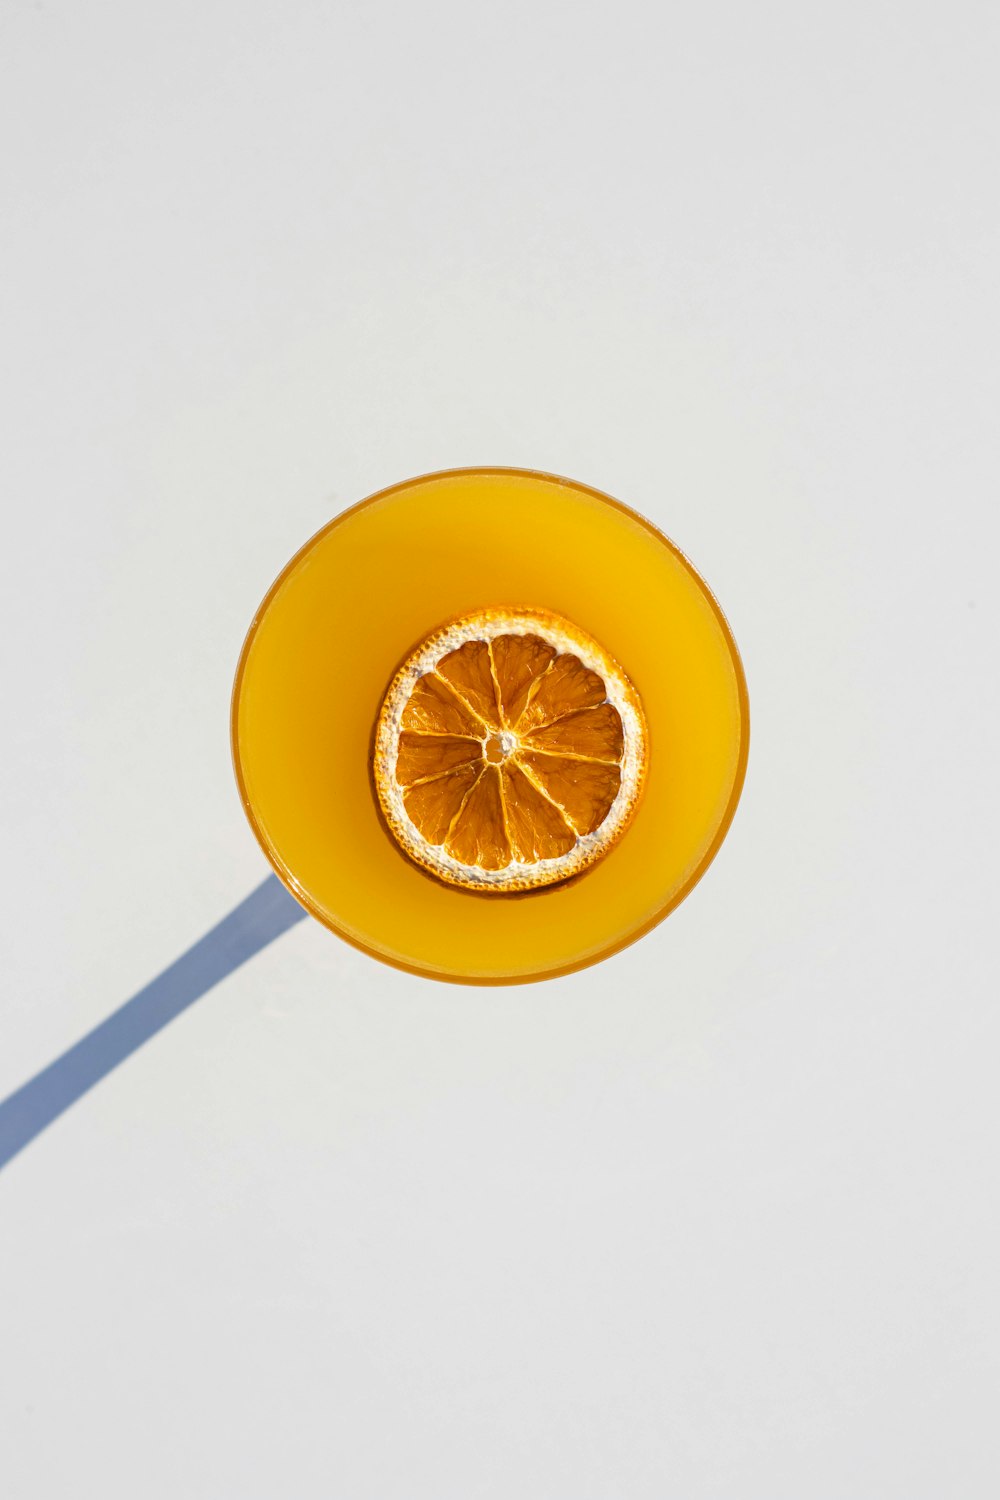 an orange slice in a yellow bowl on a white surface